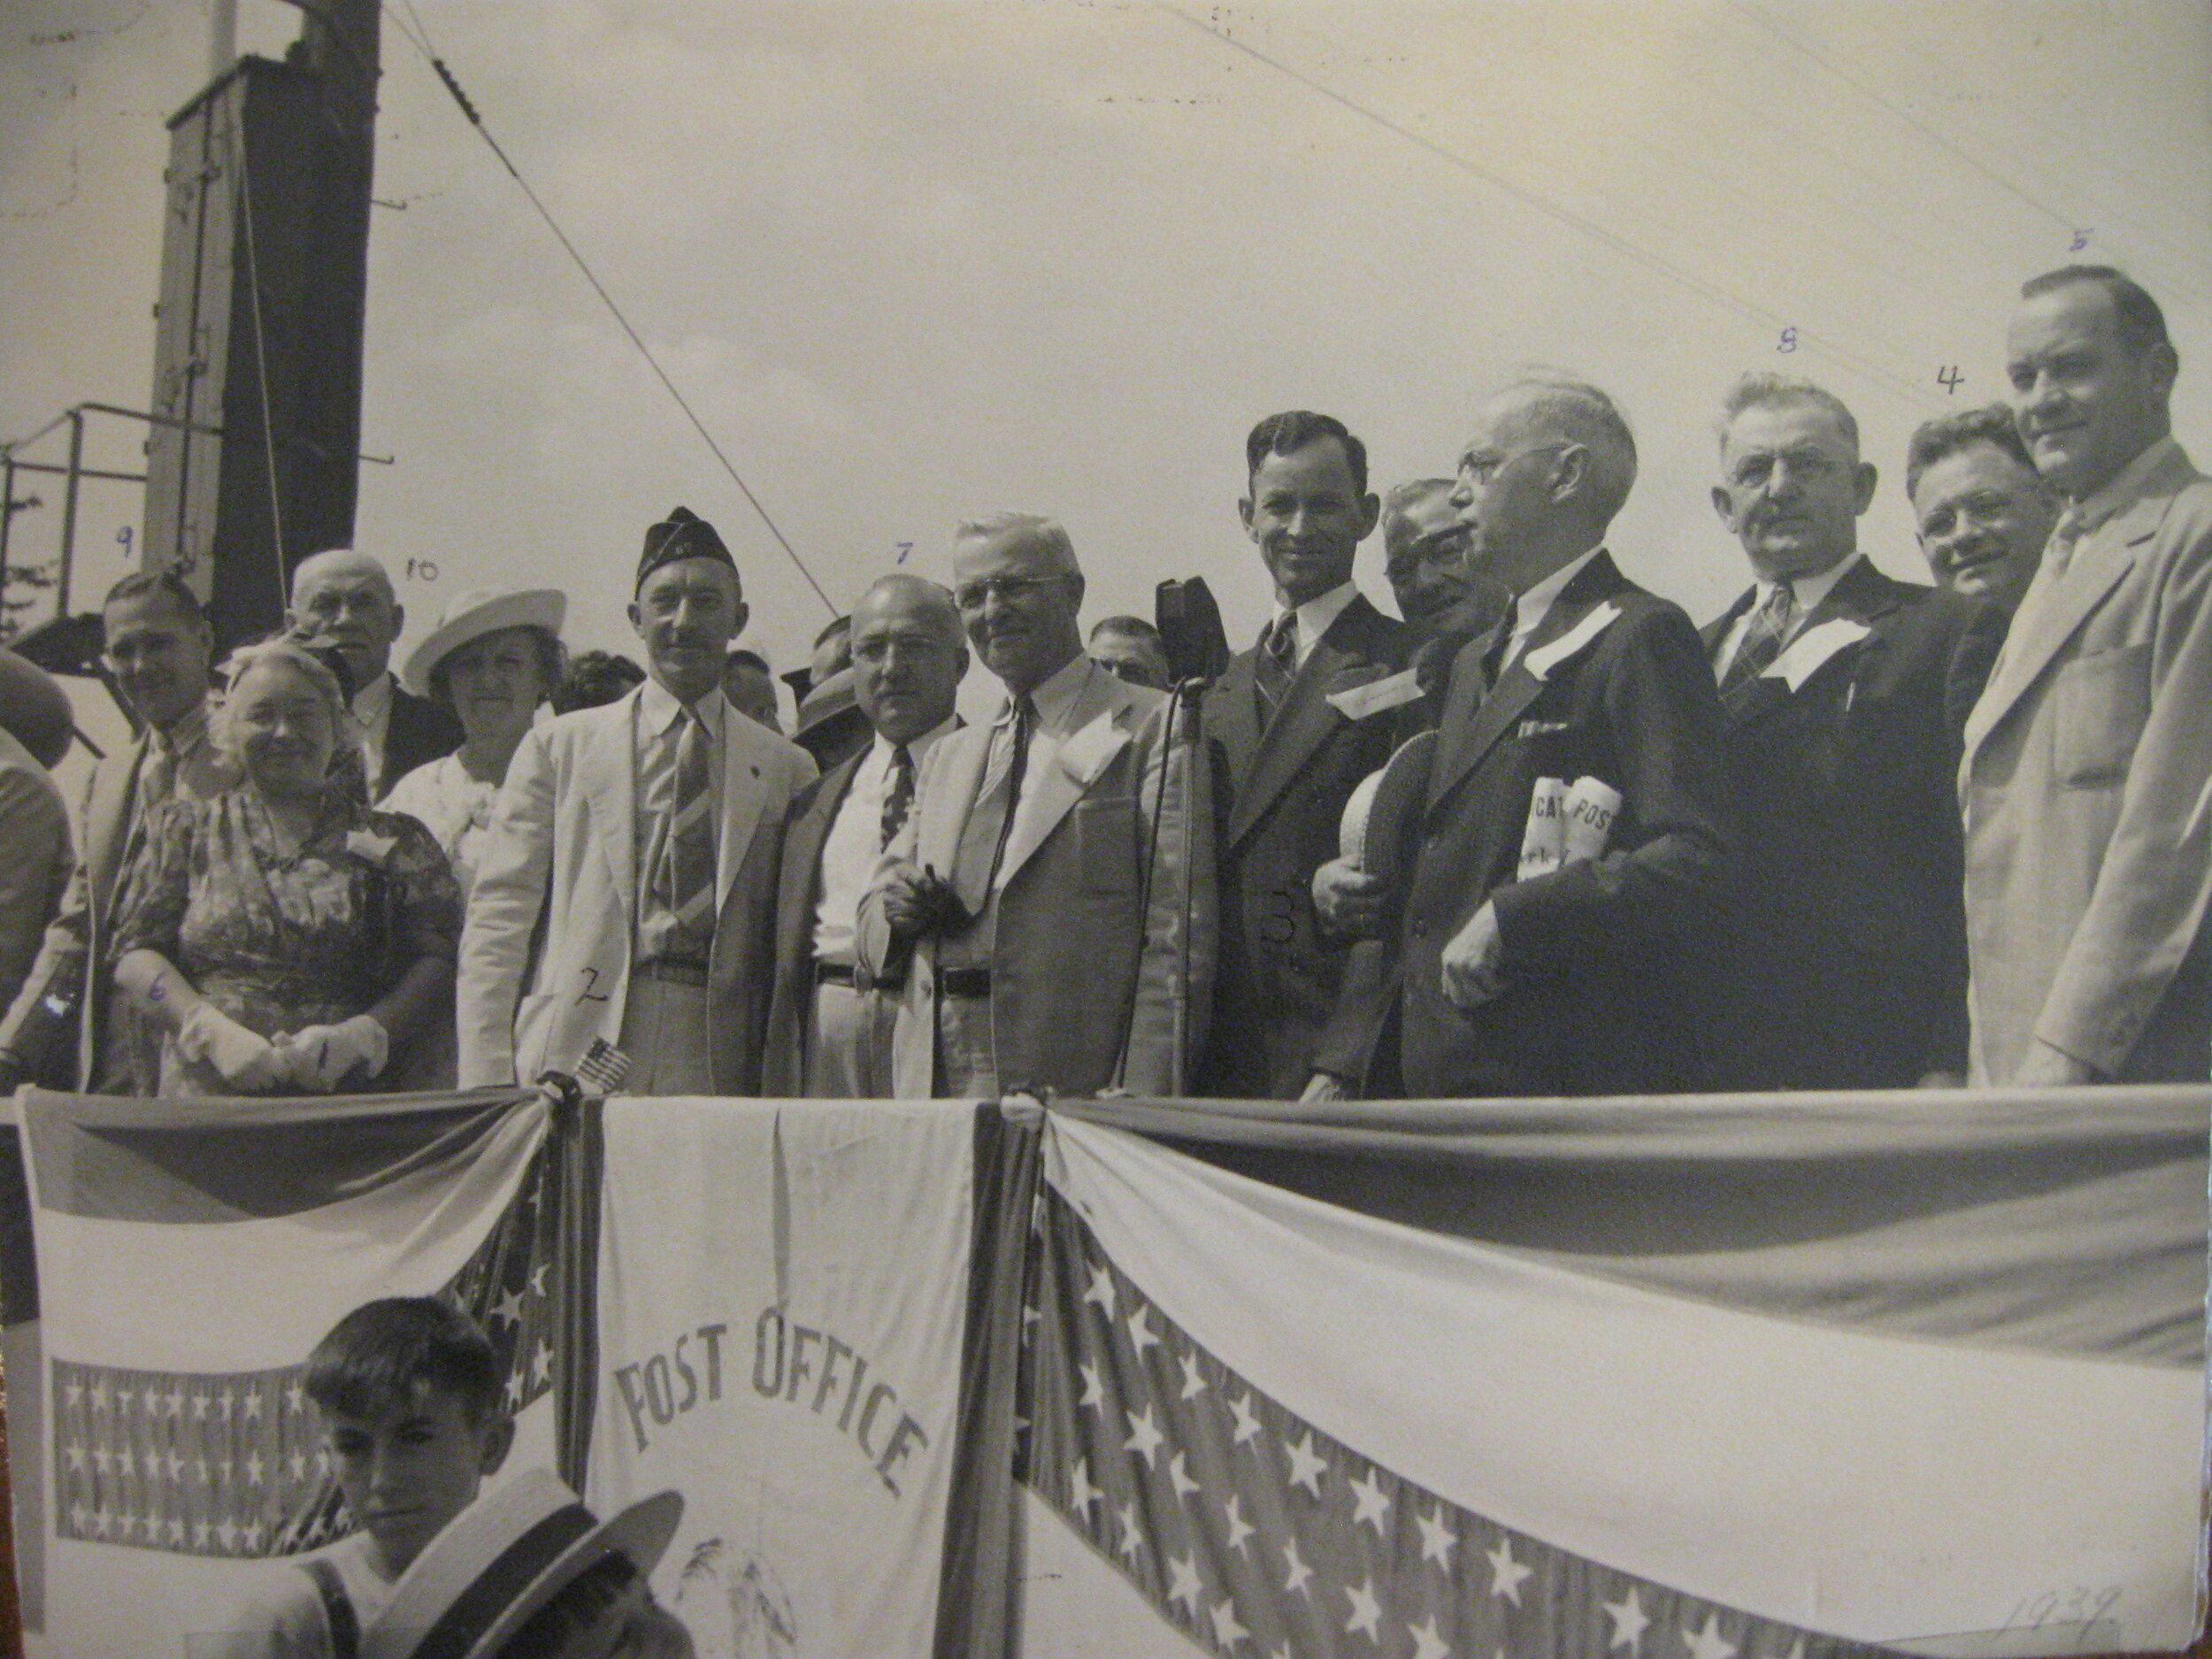 Dedication ceremony for the new post office building, August 5, 1939